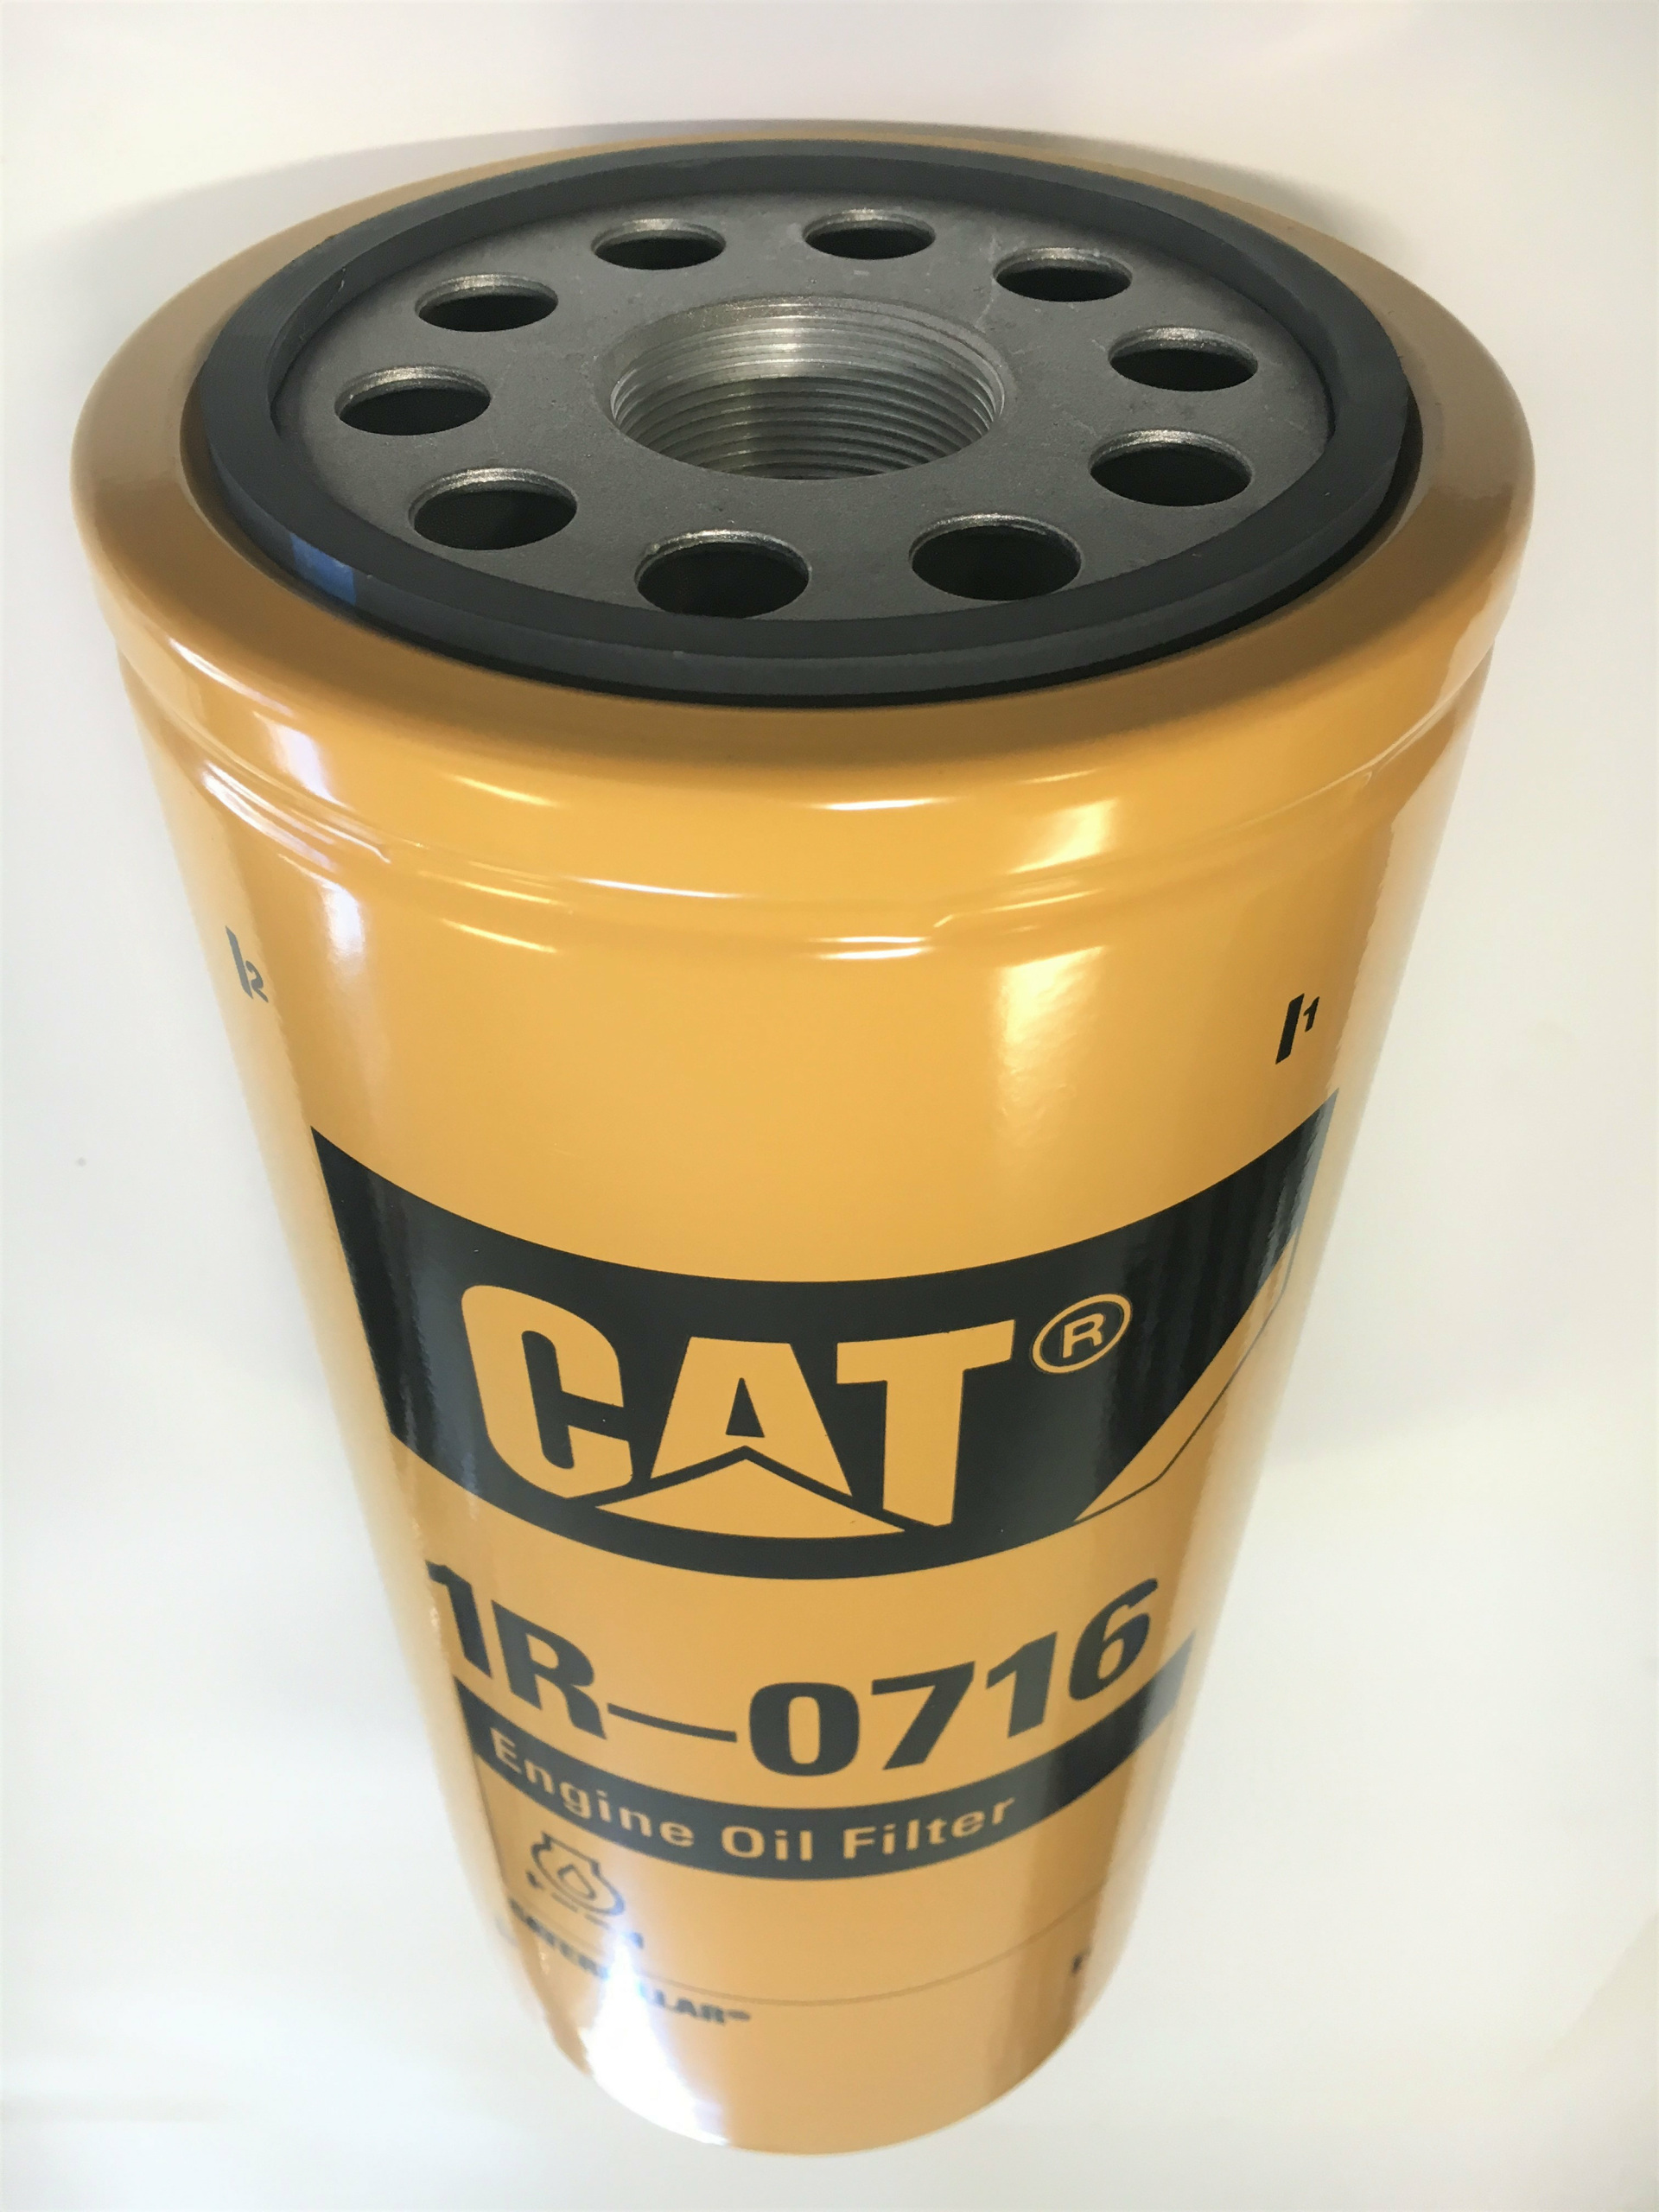 OIL FILTER, CAT 1R0716 AVAILABILITY NORMALLY STOCKED ITEM